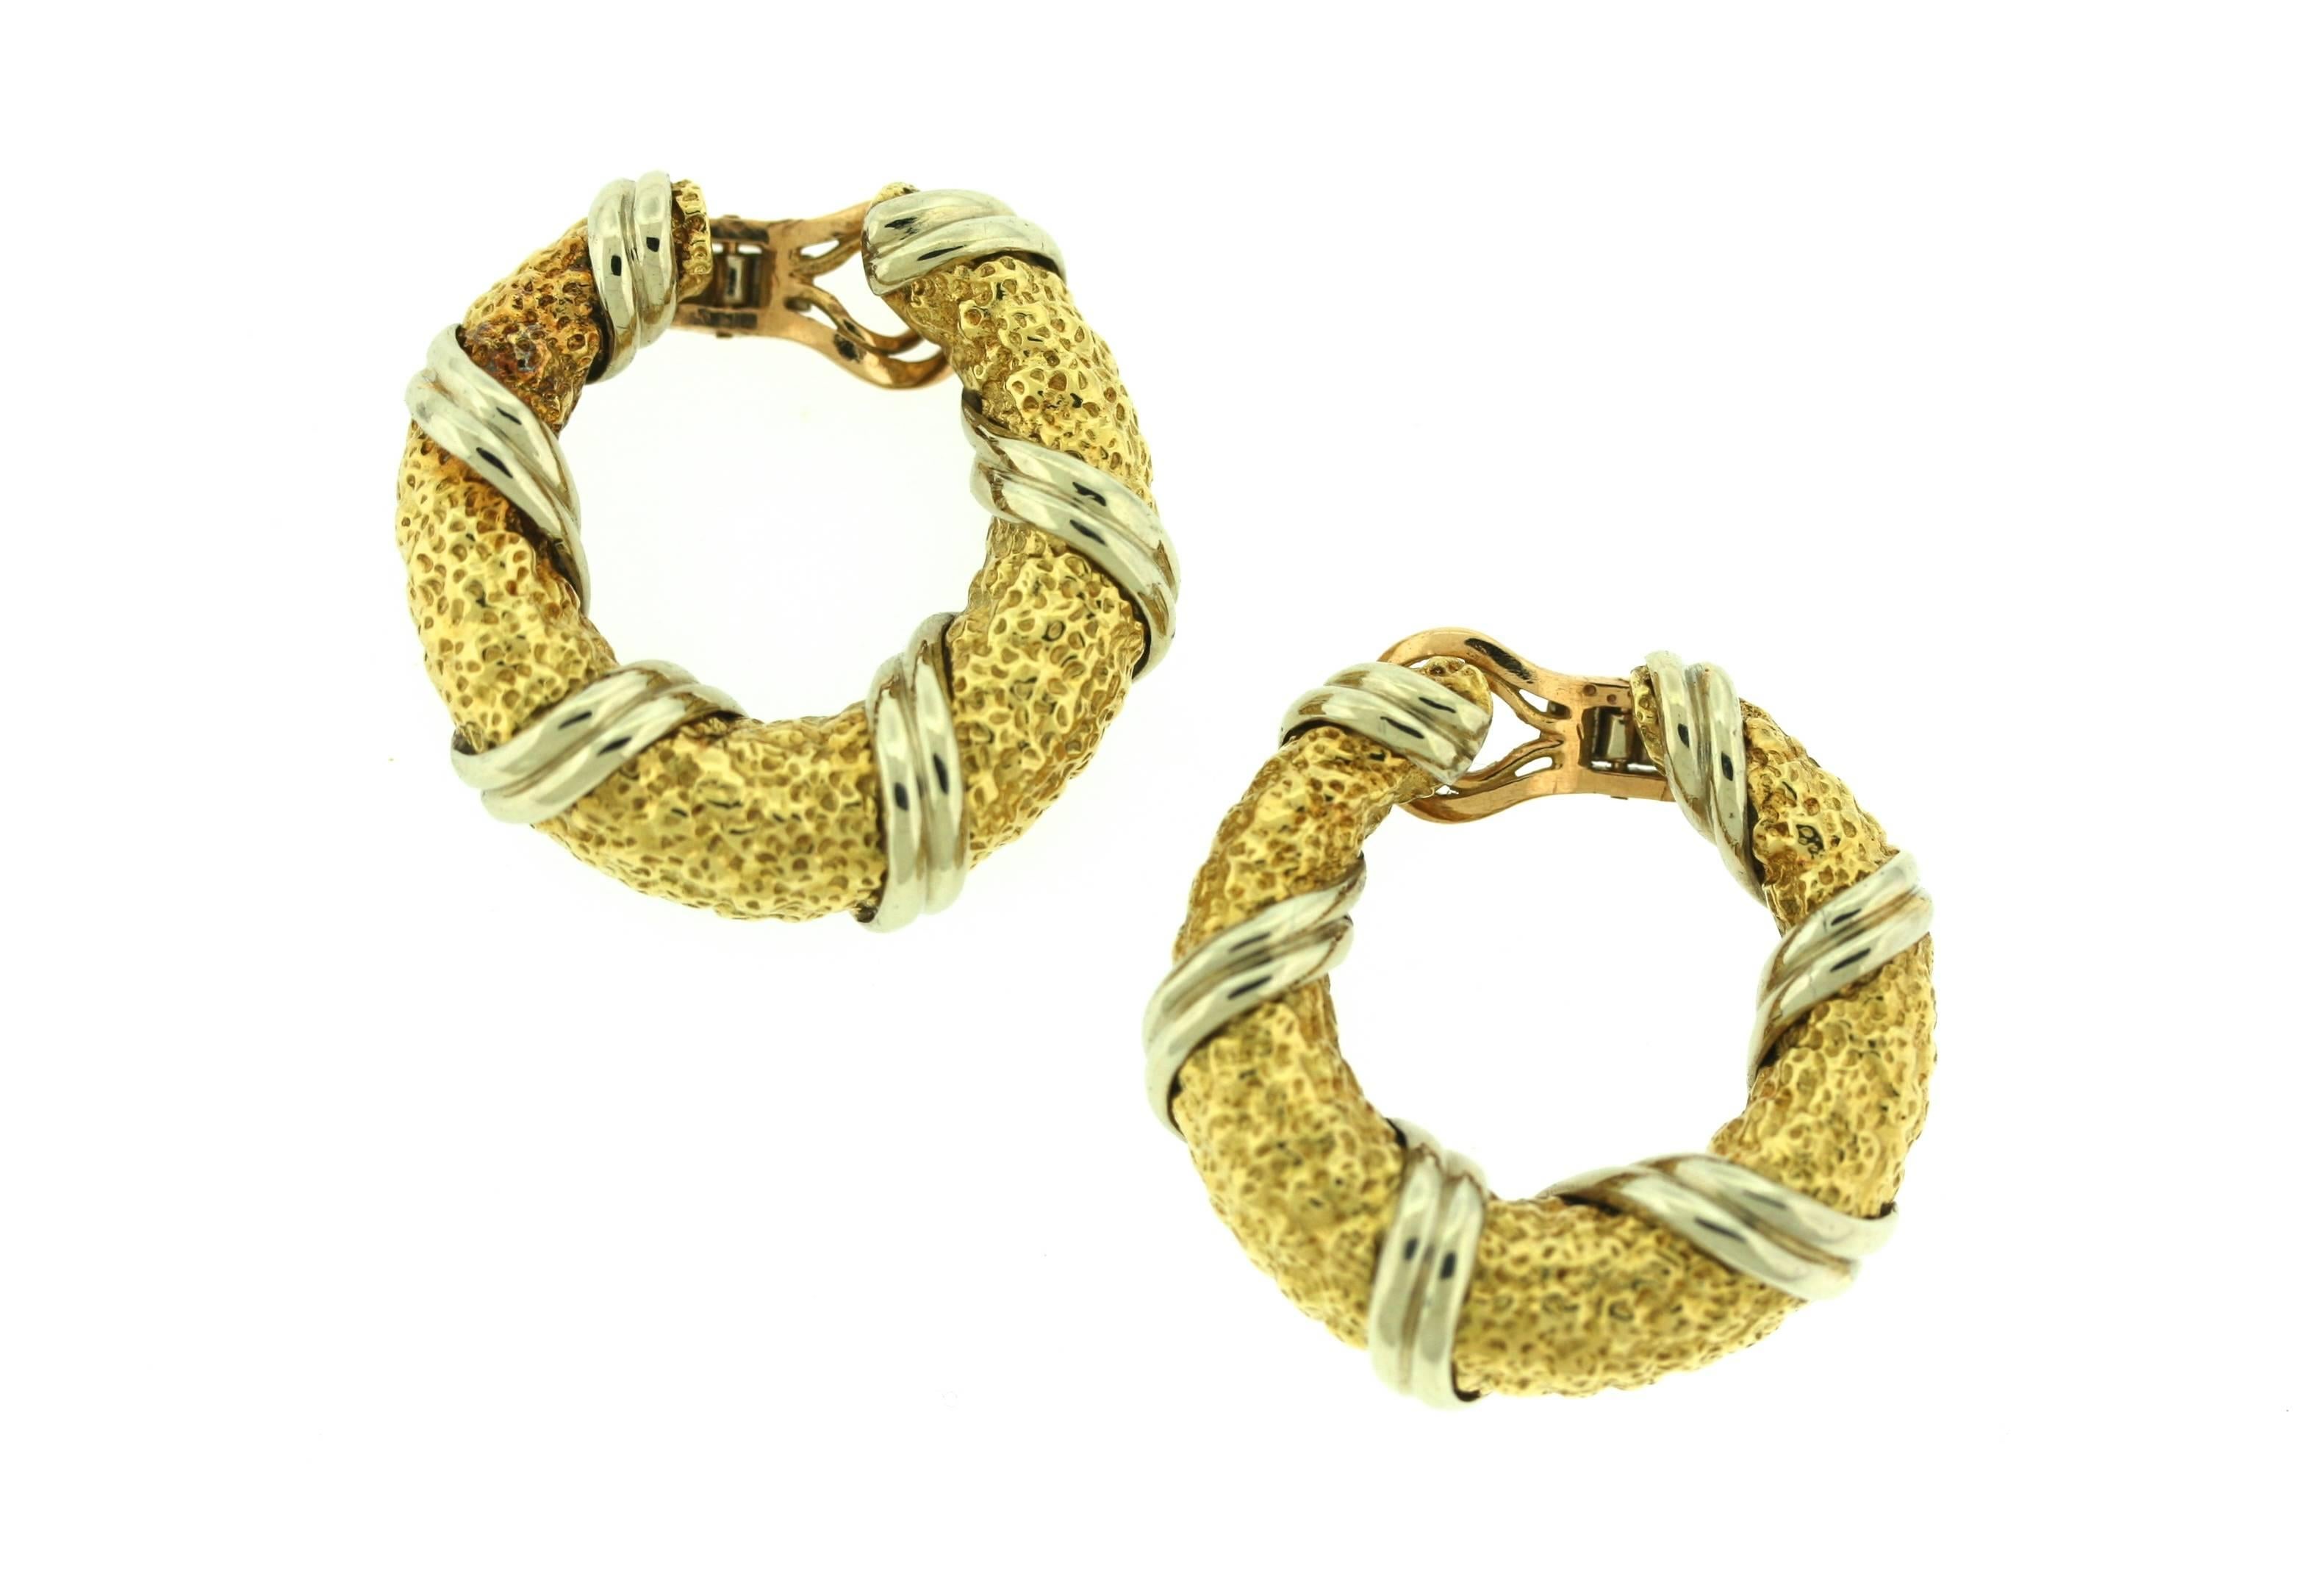 Van Cleef & Arpels textured 18k yellow gold hoop earrings wrapped in ribbons of polished white gold. 1 3/8